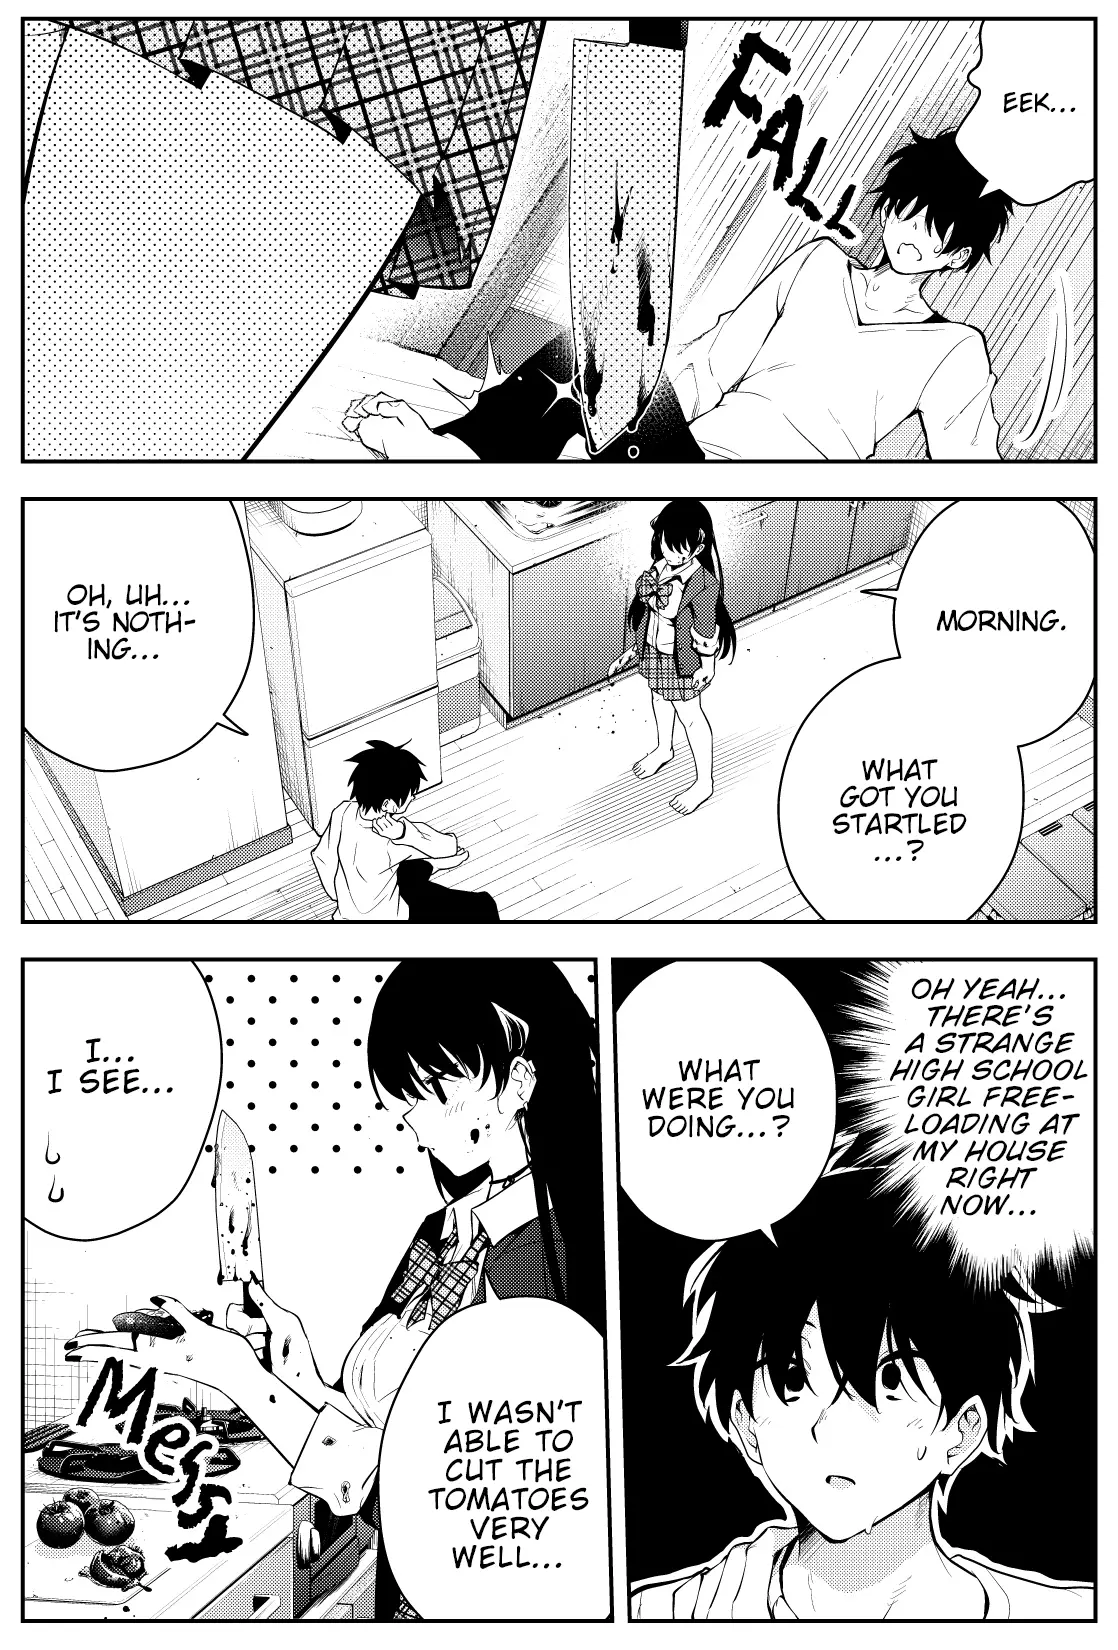 The Story Of A Manga Artist Confined By A Strange High School Girl - 32 page 3-0fc68bf0